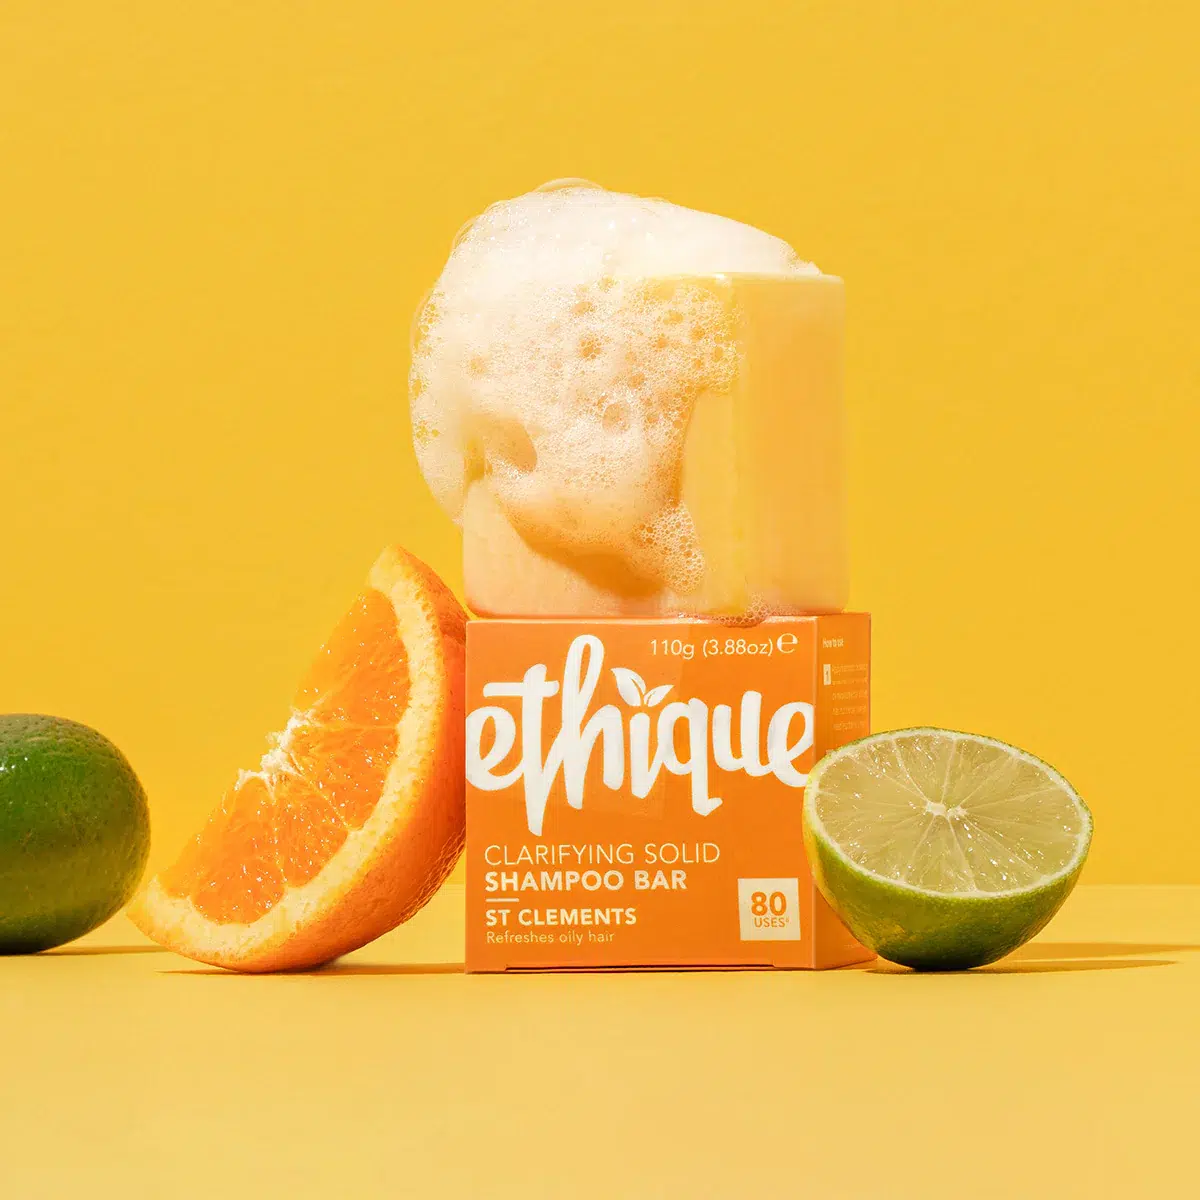 A shampoo bar with foam on top, set against a yellow background flanked by citrus fruit slices.